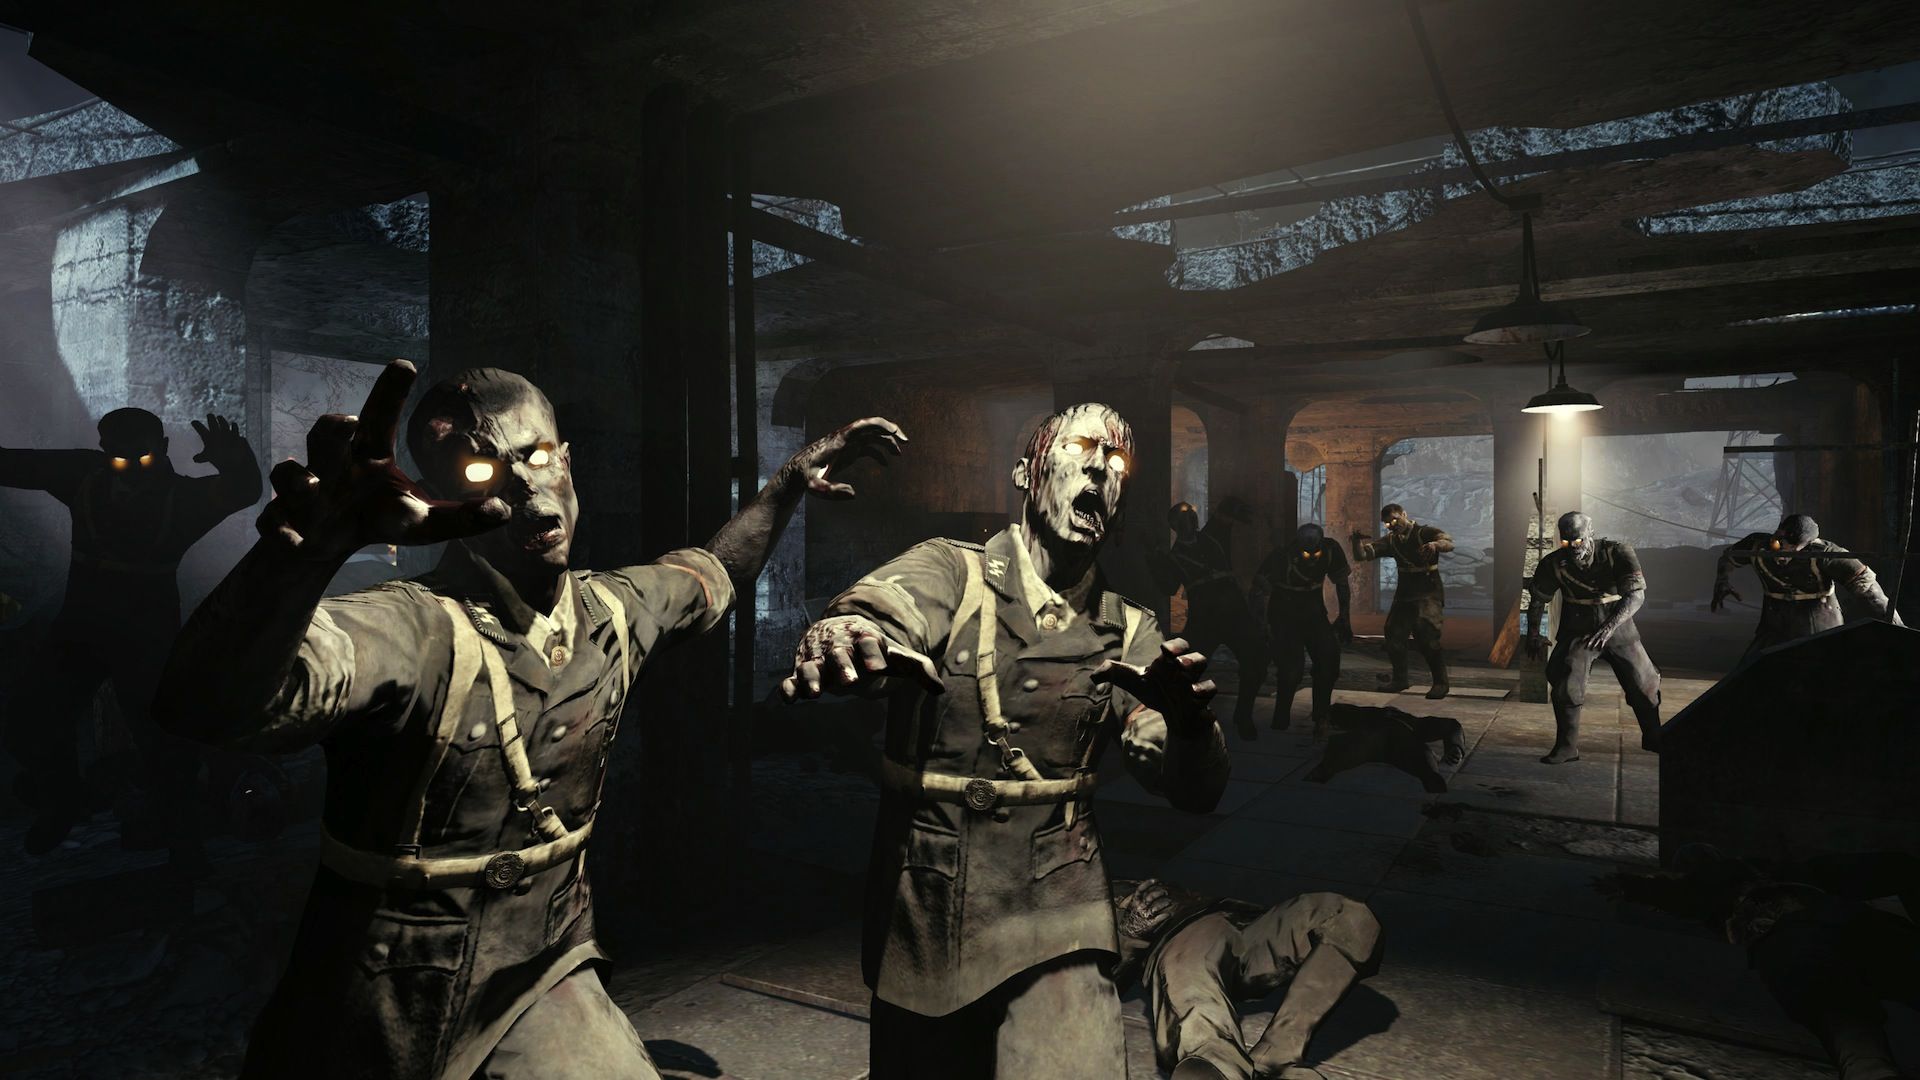 Download Call Of Duty Zombies Wallpaper 291 1920x1080 px High resolution